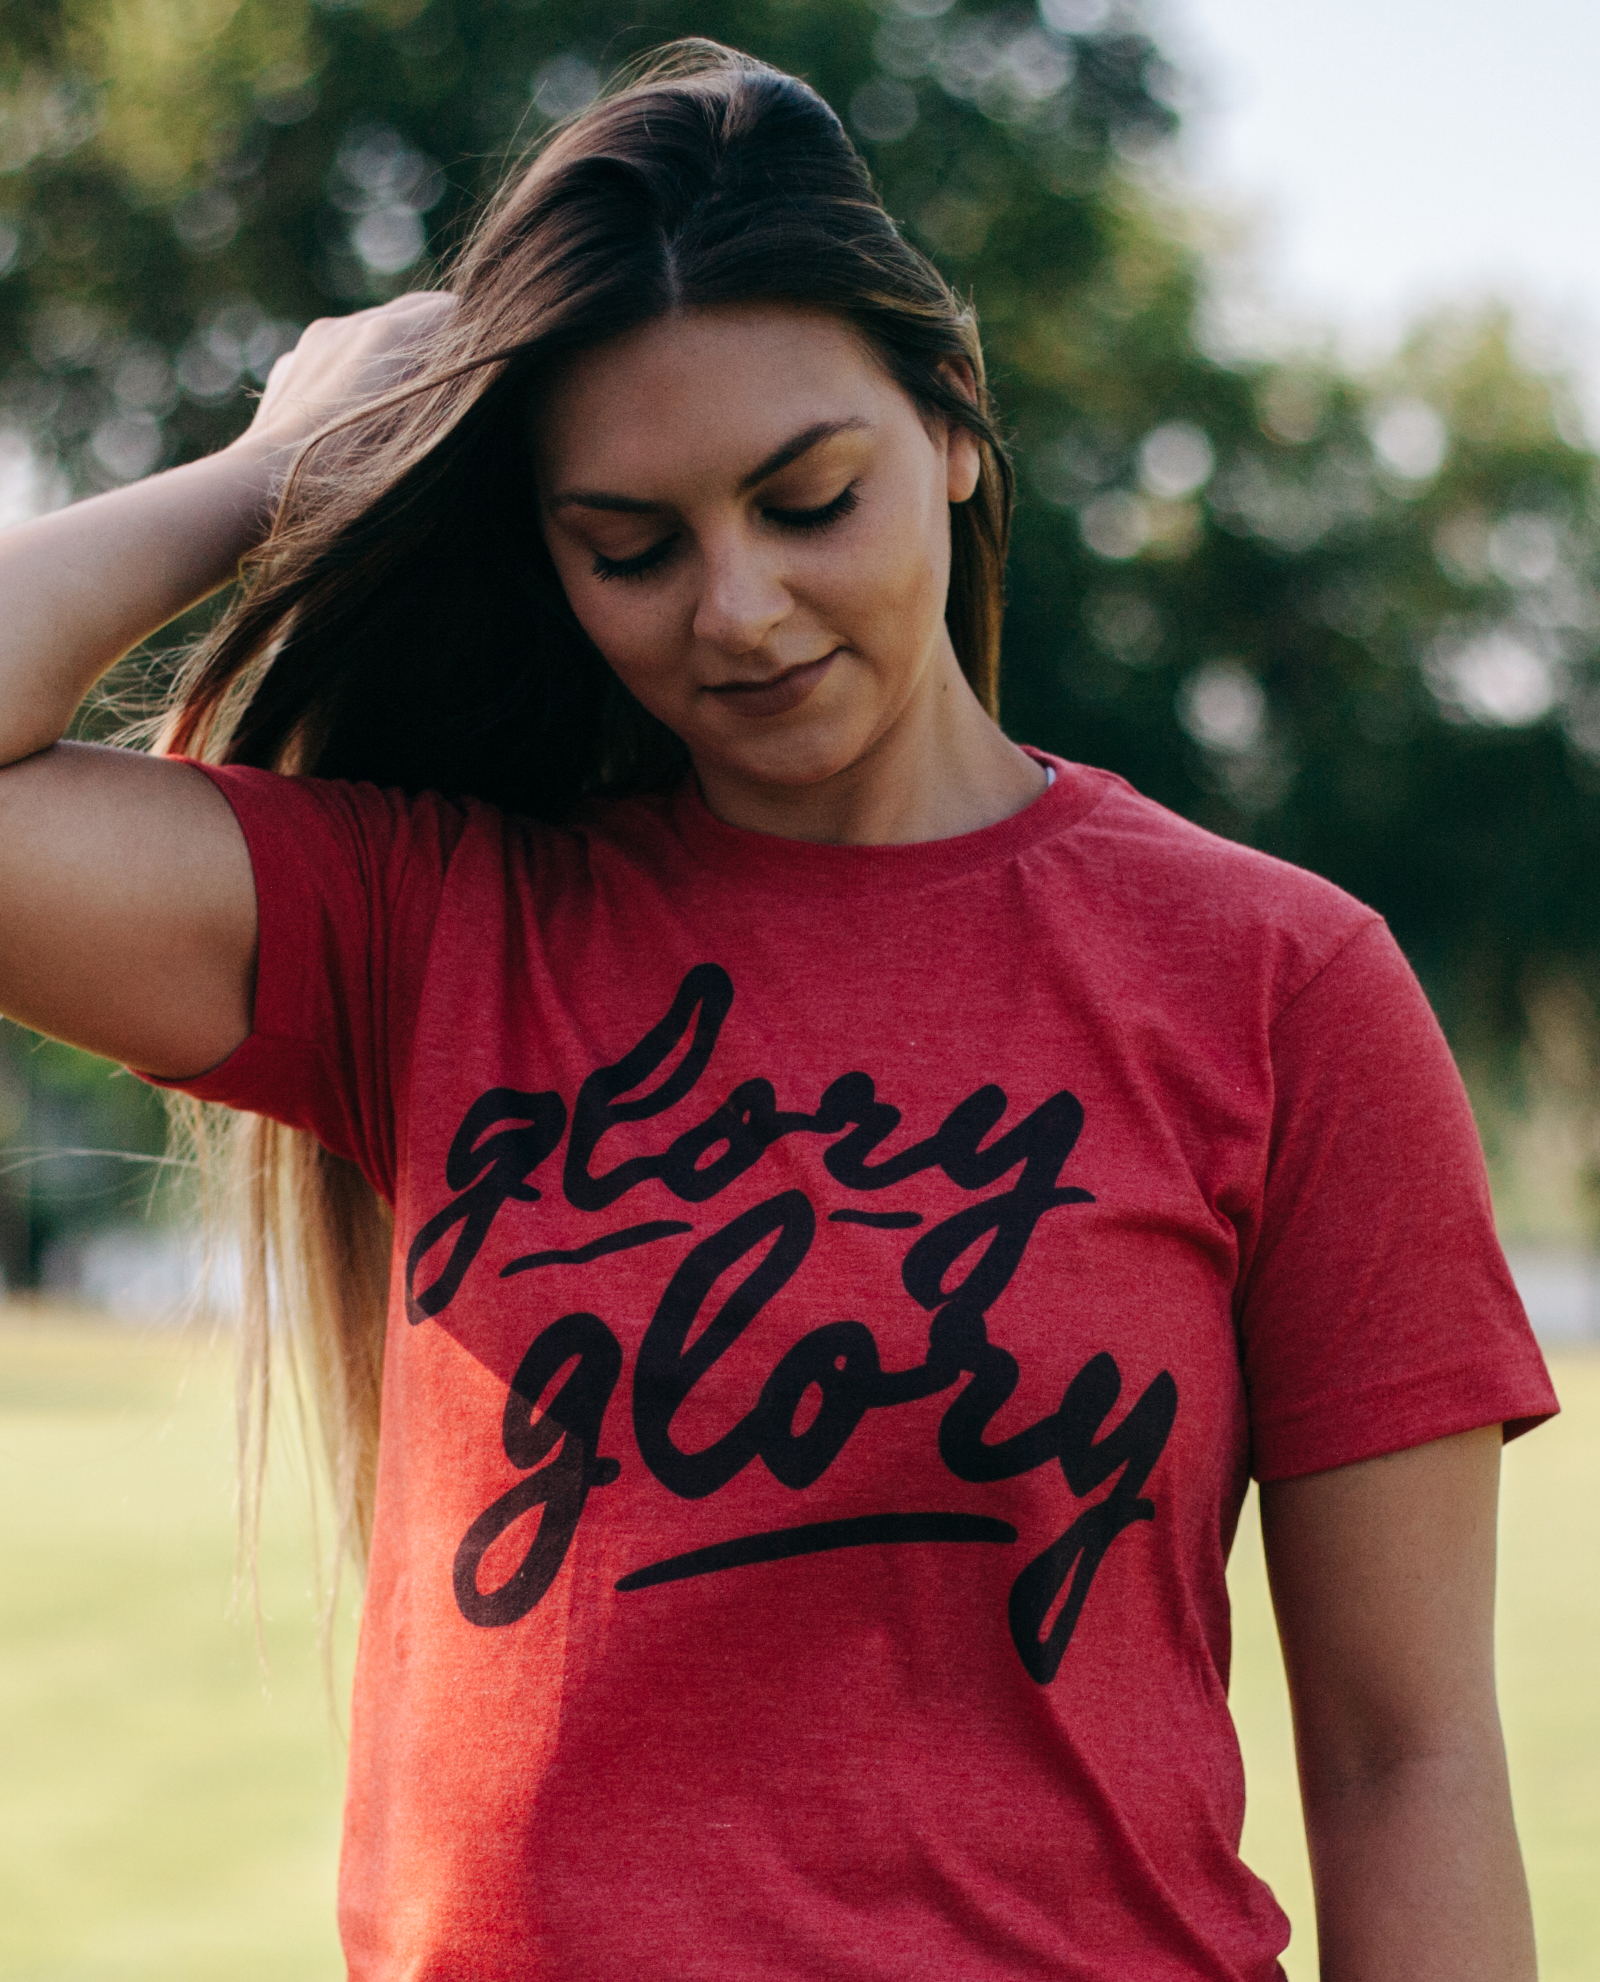 Woman wearing red Glory Glory shirt with hand in her hair